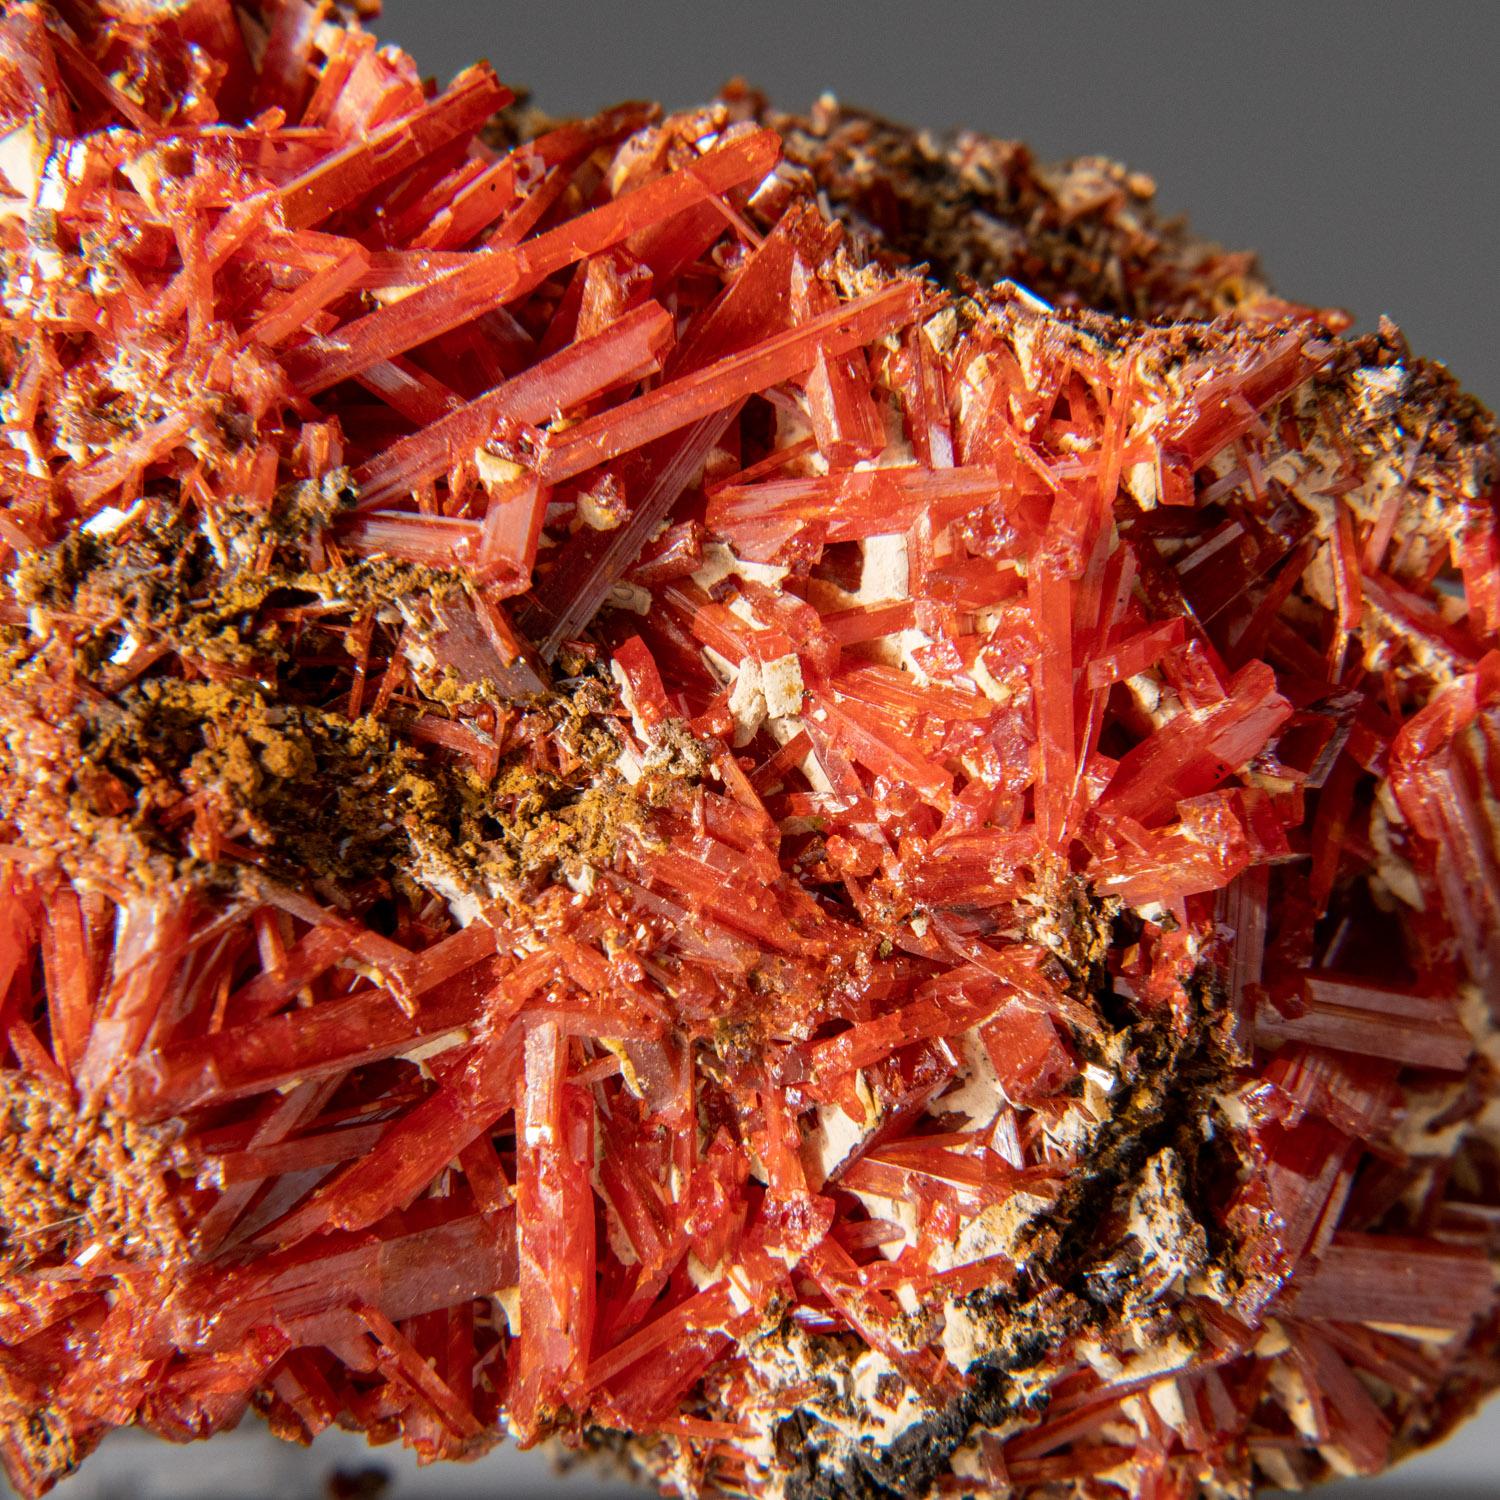 This unique red-orange Crocoite needle-like crystals from Red Lead Mine, Dundas, Tasmania, Australia. The lustrous and clean crystals have high visibility on the matrix, making this a standout piece for any mineral collection. It displays incredible